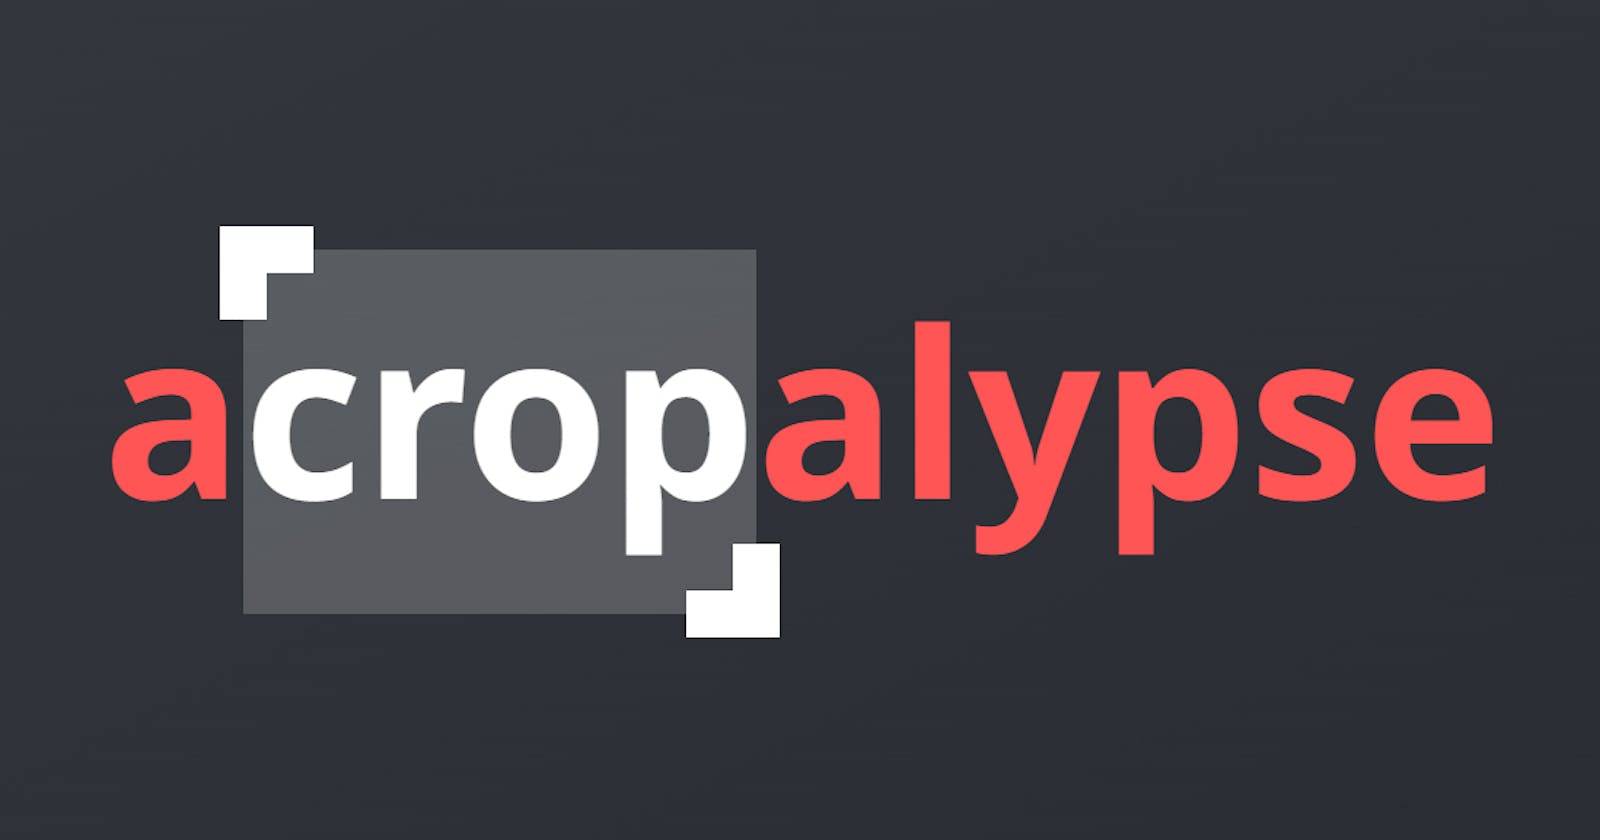 Detecting aCropalypse with Python and Powershell